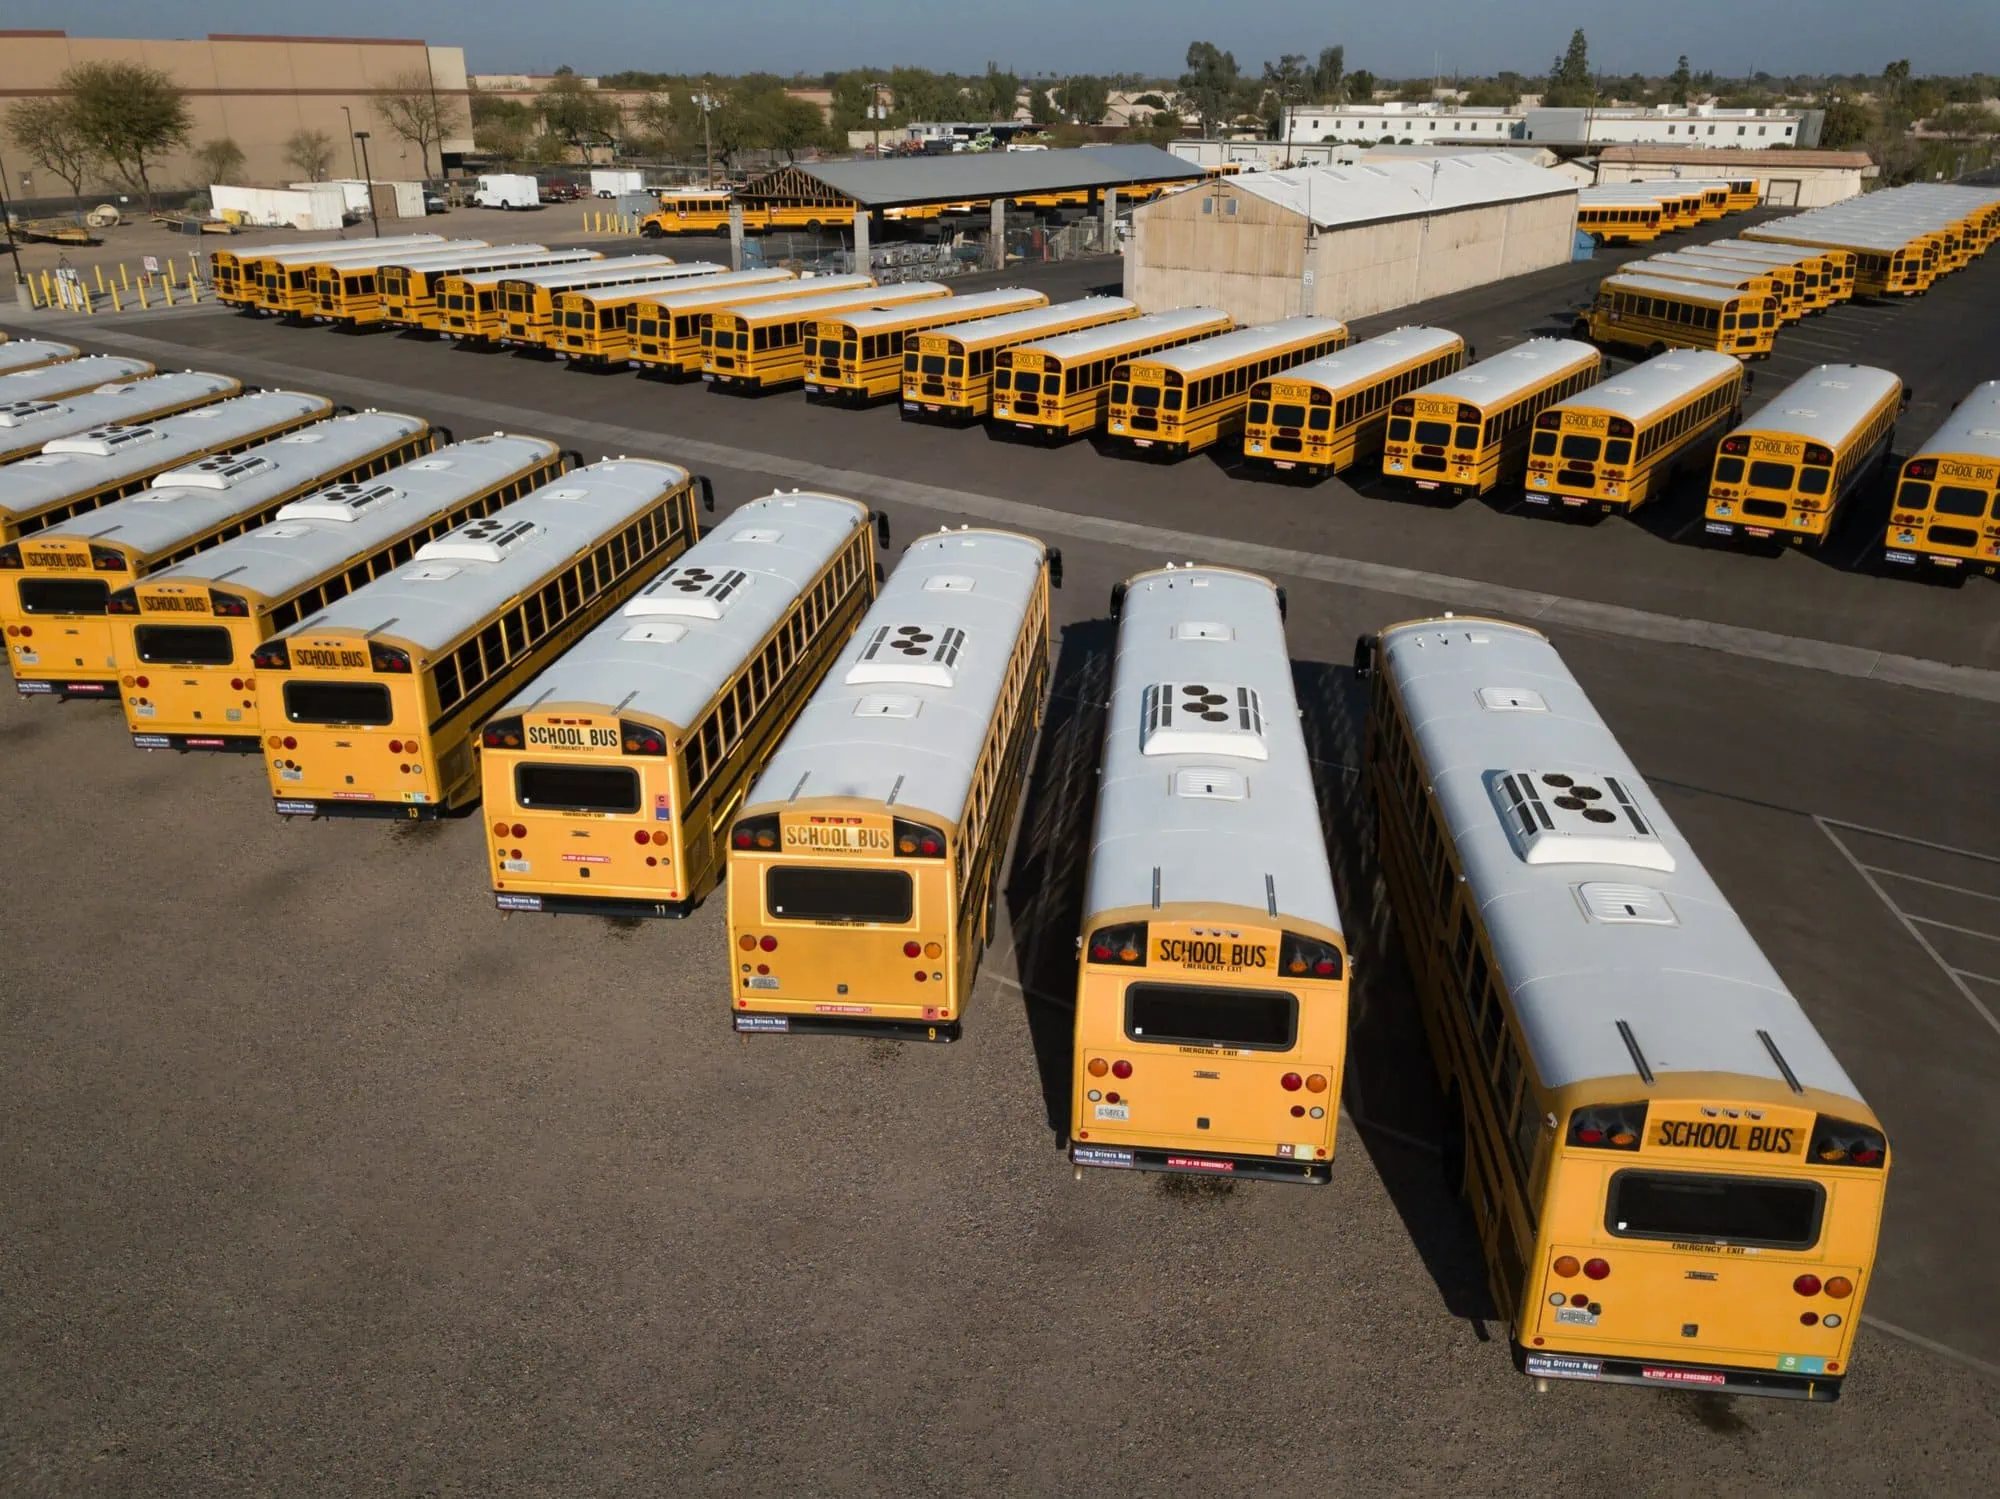 Parking lot full of school buses, all equipped with a camera system